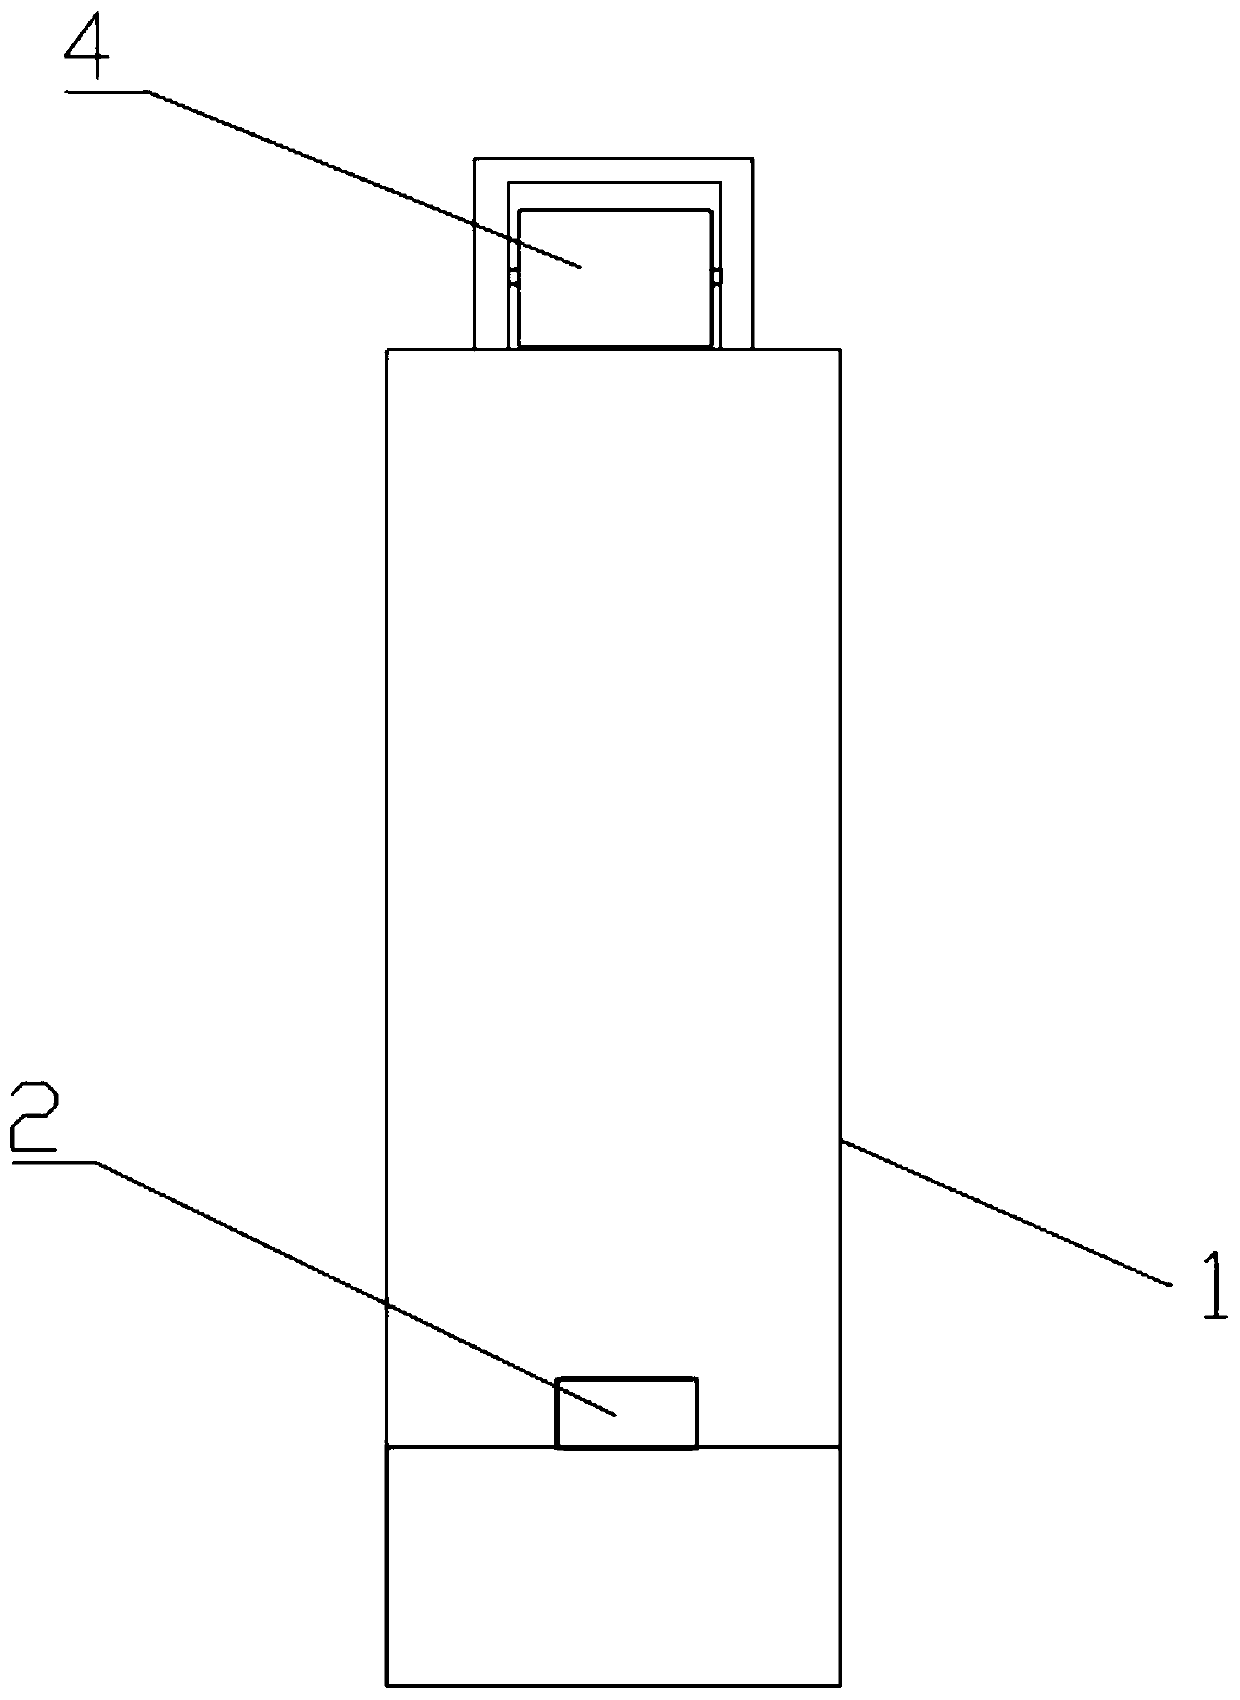 Periscopic lifting camera assembly and electronic equipment